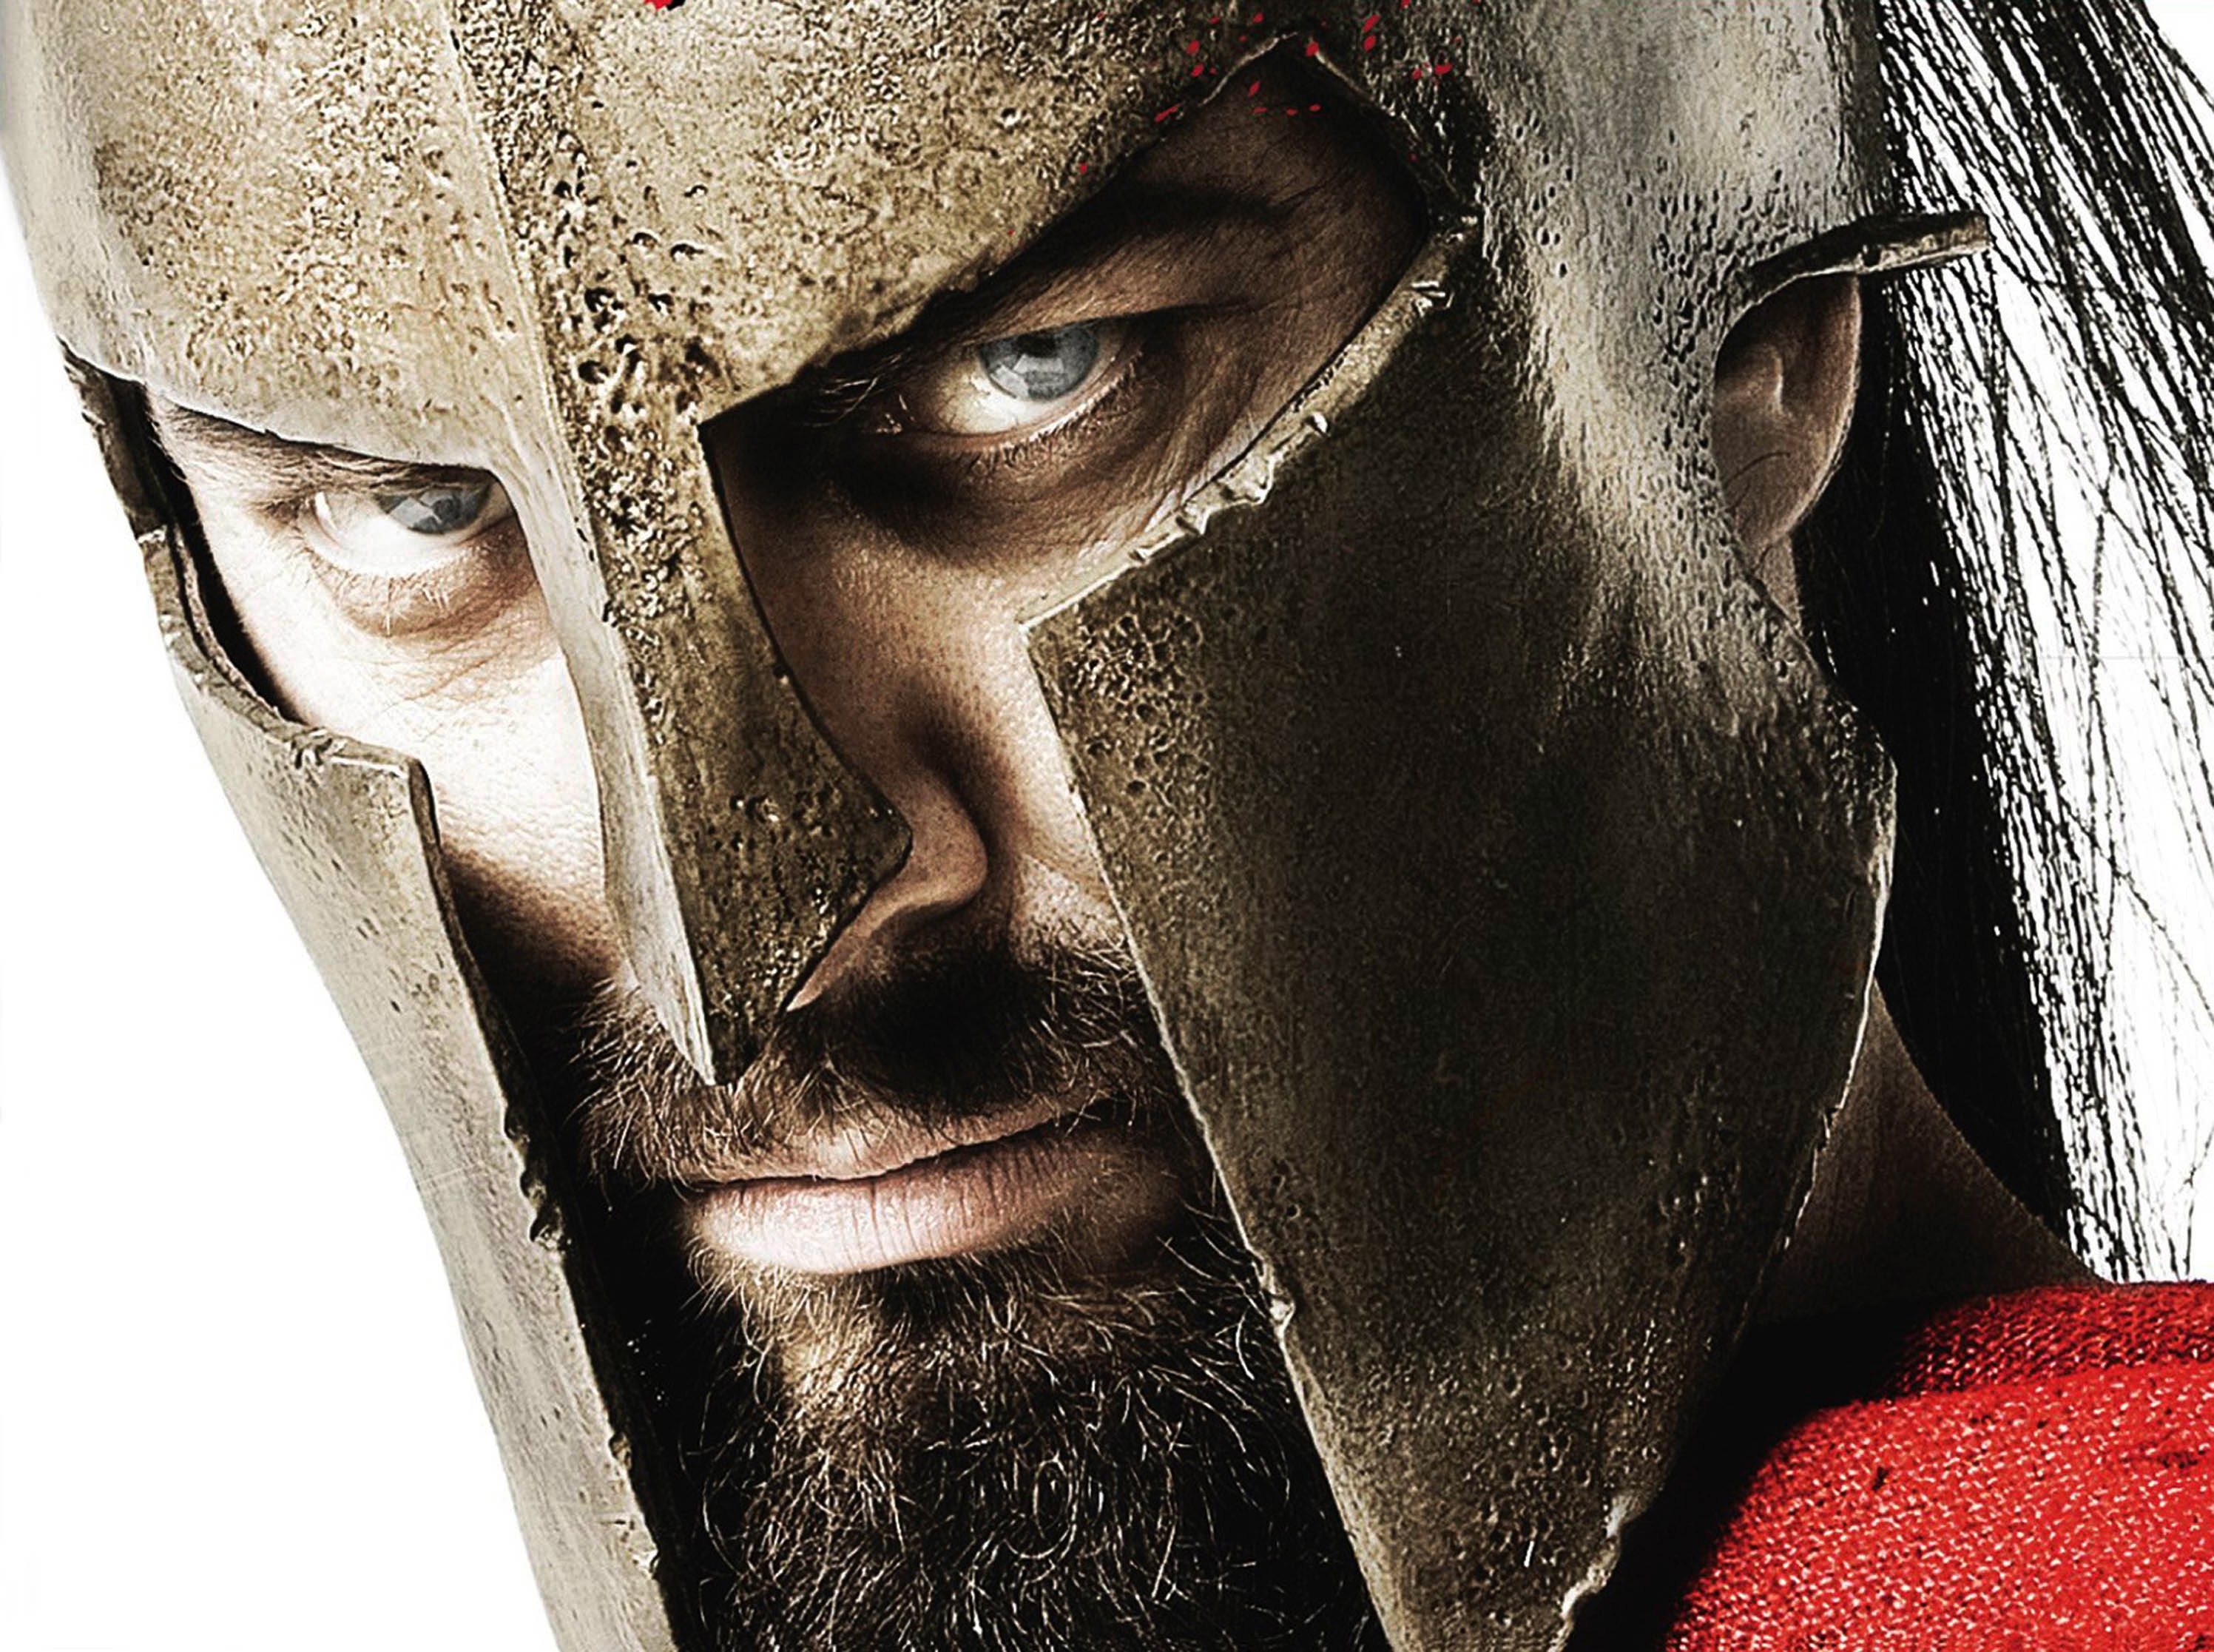 Michael Fassbender: 300 - Everything you wanted to know about the Spartans